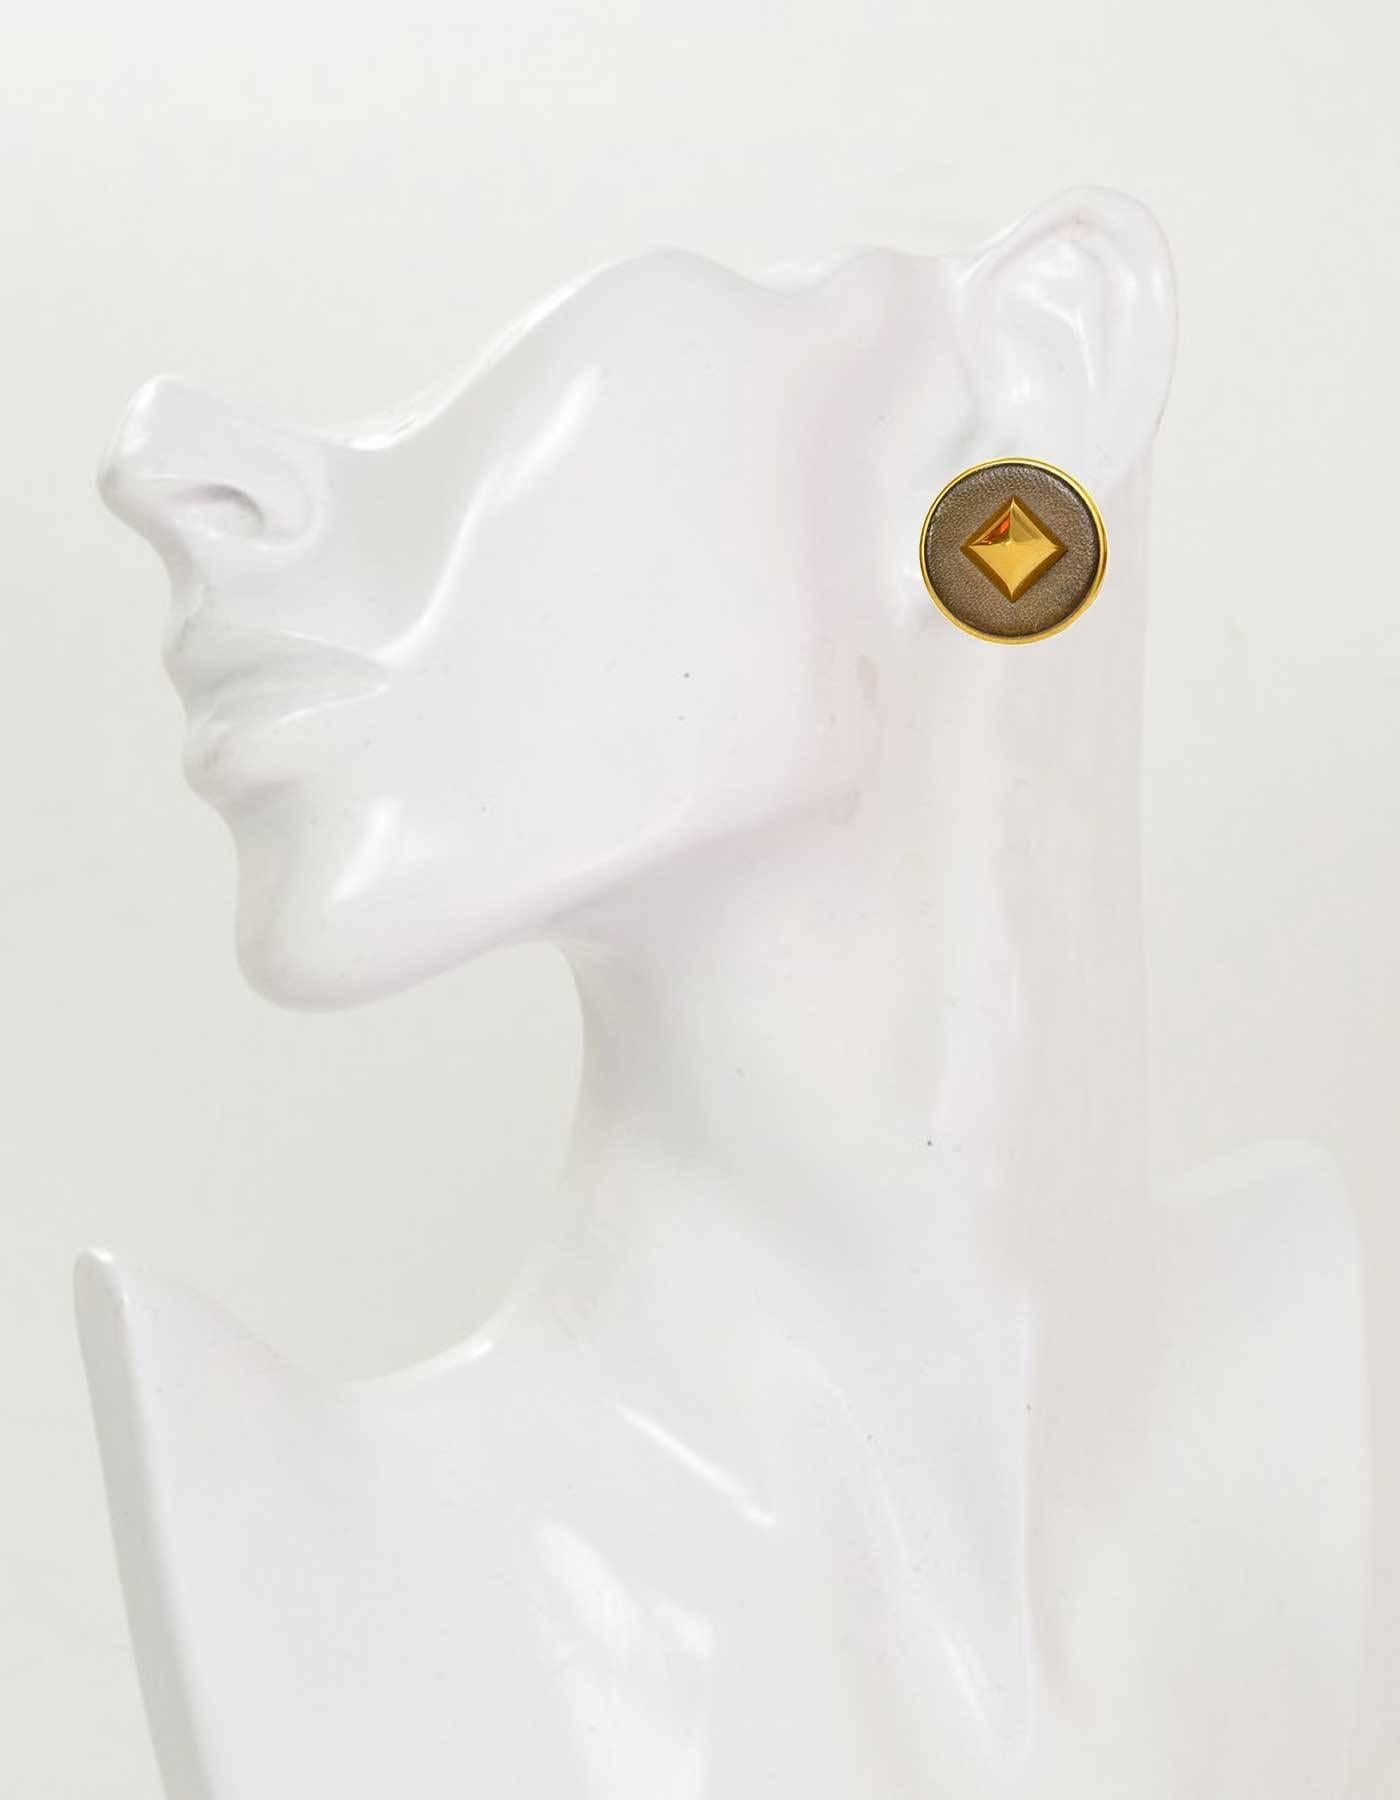 Hermes Gold & Taupe Leather Medor Clip On Earrings

Stamp: Hermes Paris
Closure: Clip on
Color: Taupe and goldtone
Materials: Metal and leather
Overall Condition: Excellent with the exception of some scratching to leather portion
Includes: Hermes